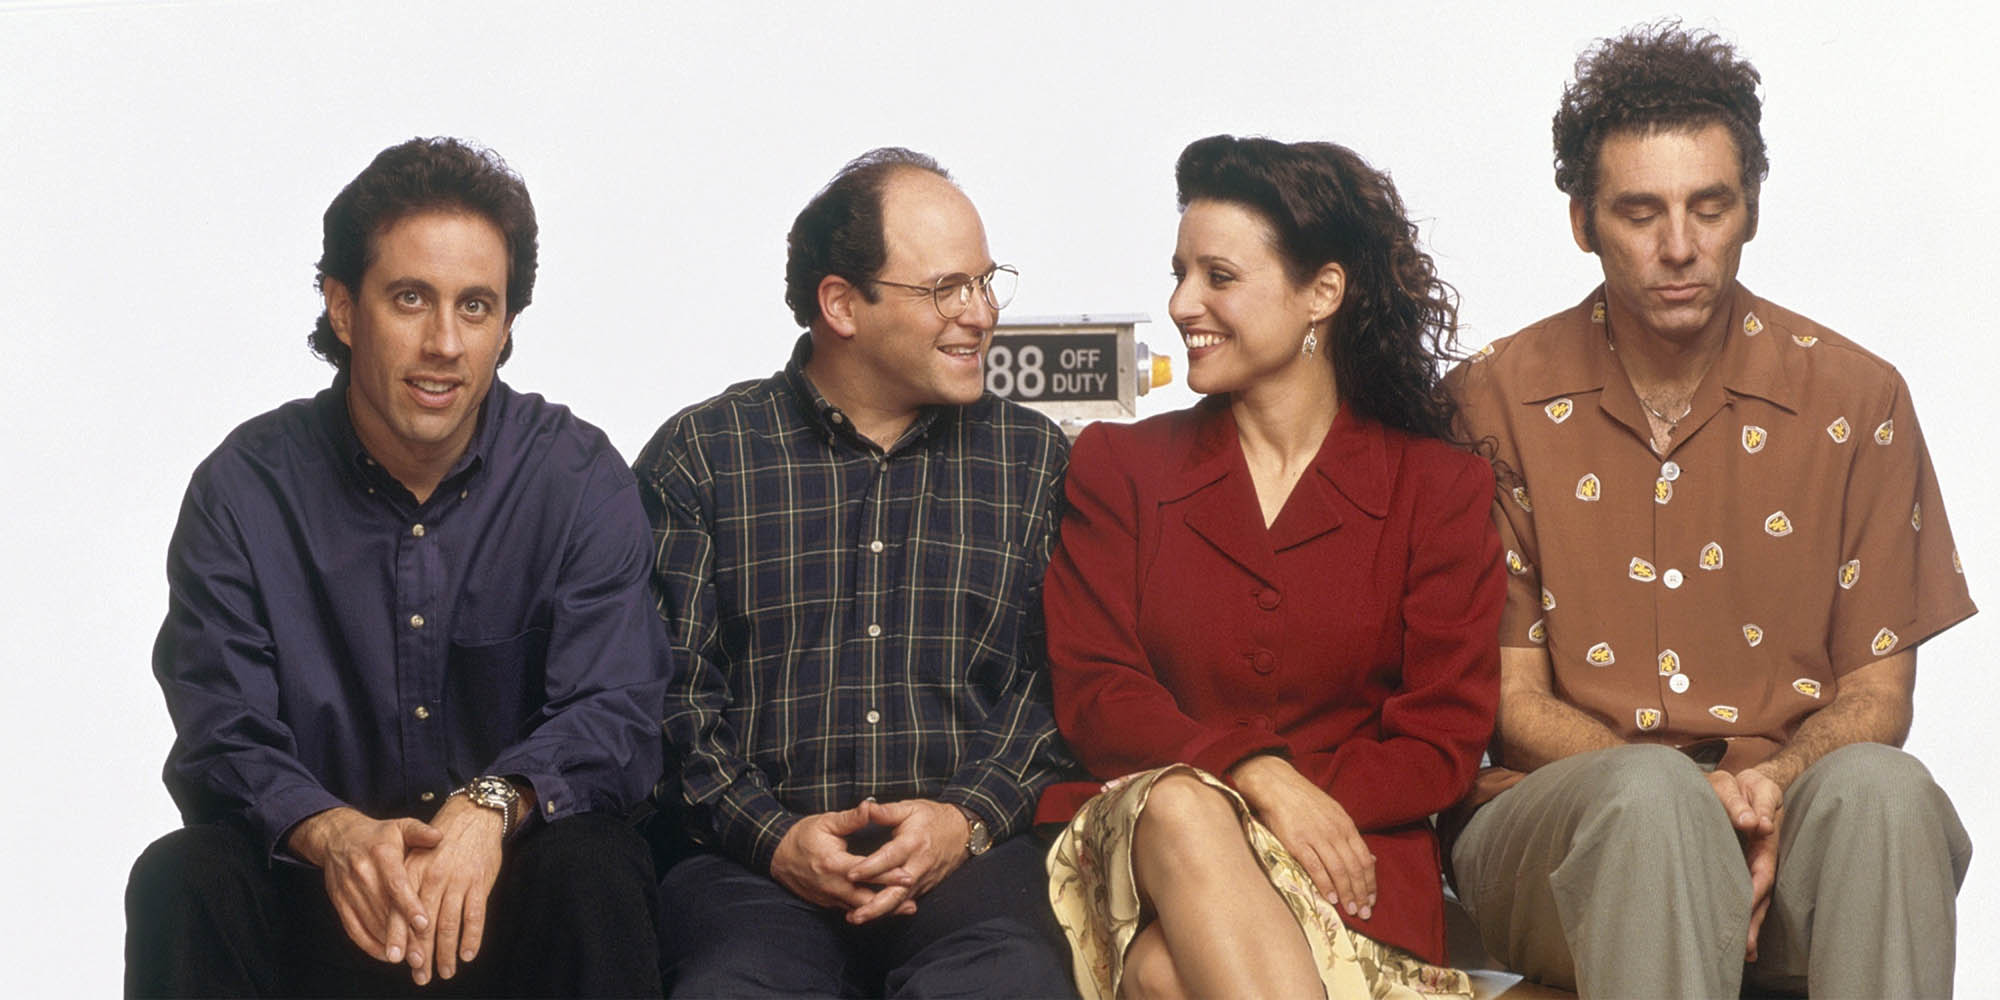 Why 'Seinfeld' makes us cringe in 2018